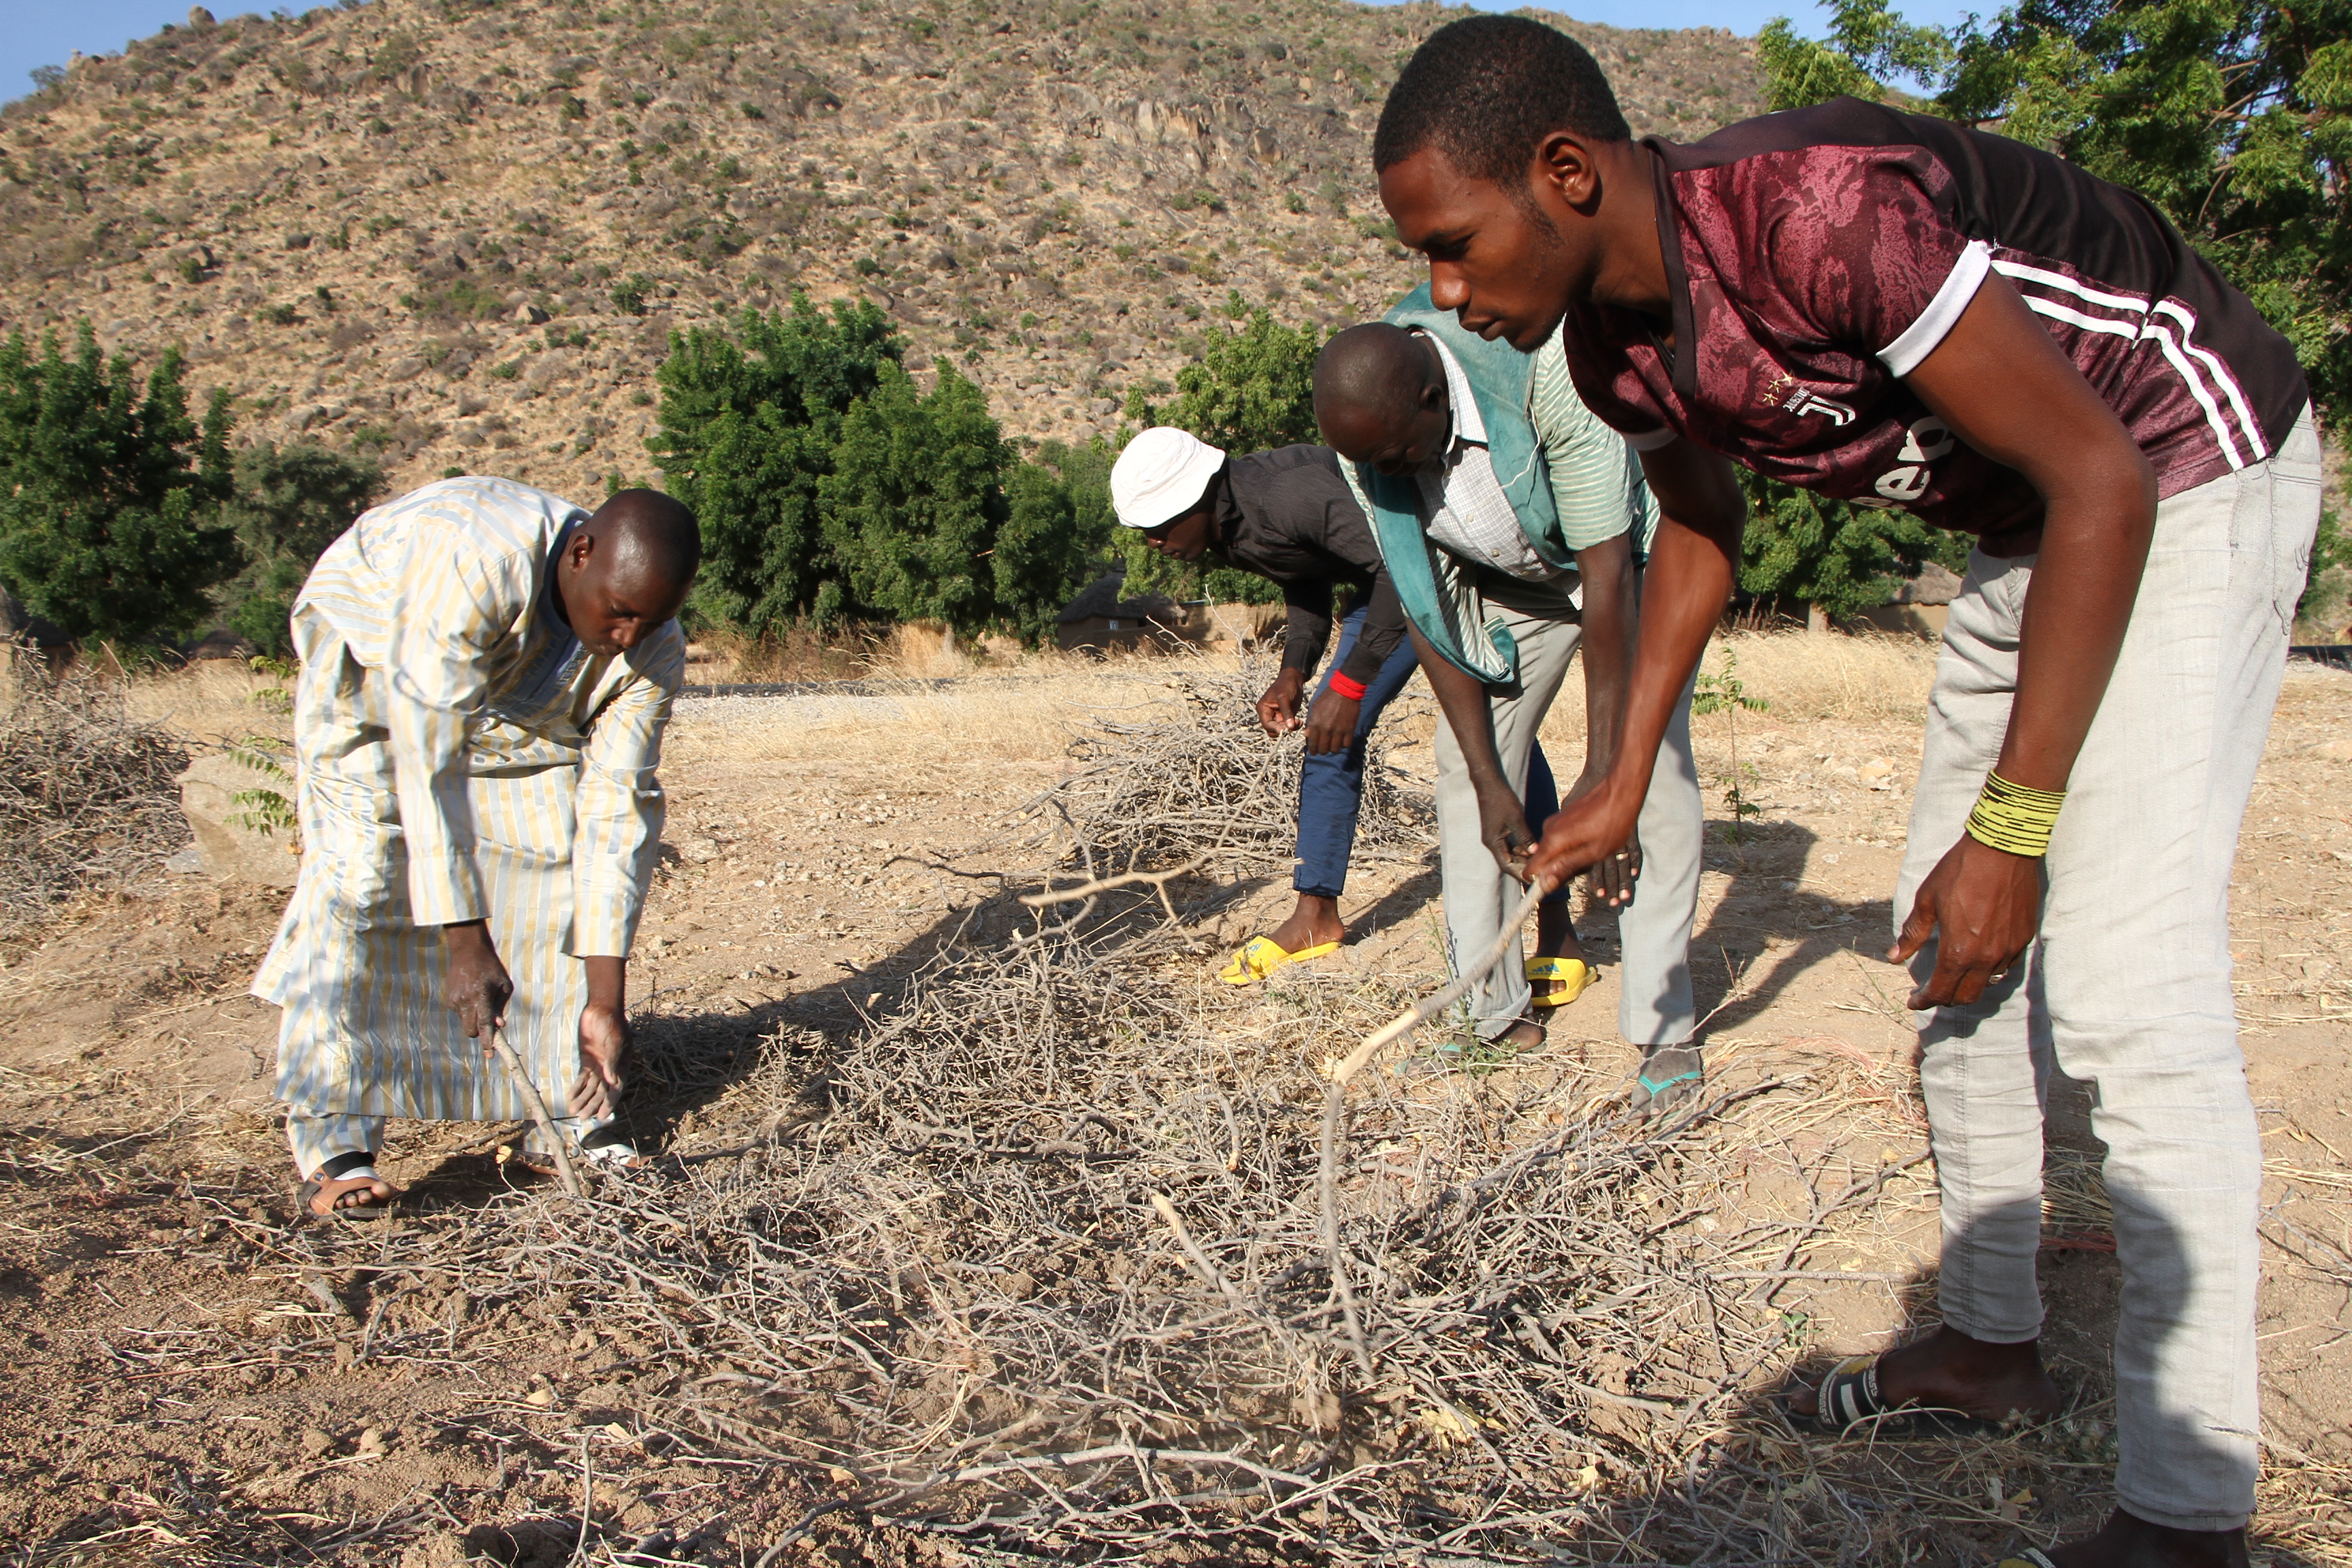 Youth is engaged in restoring dry lands of Cameroon